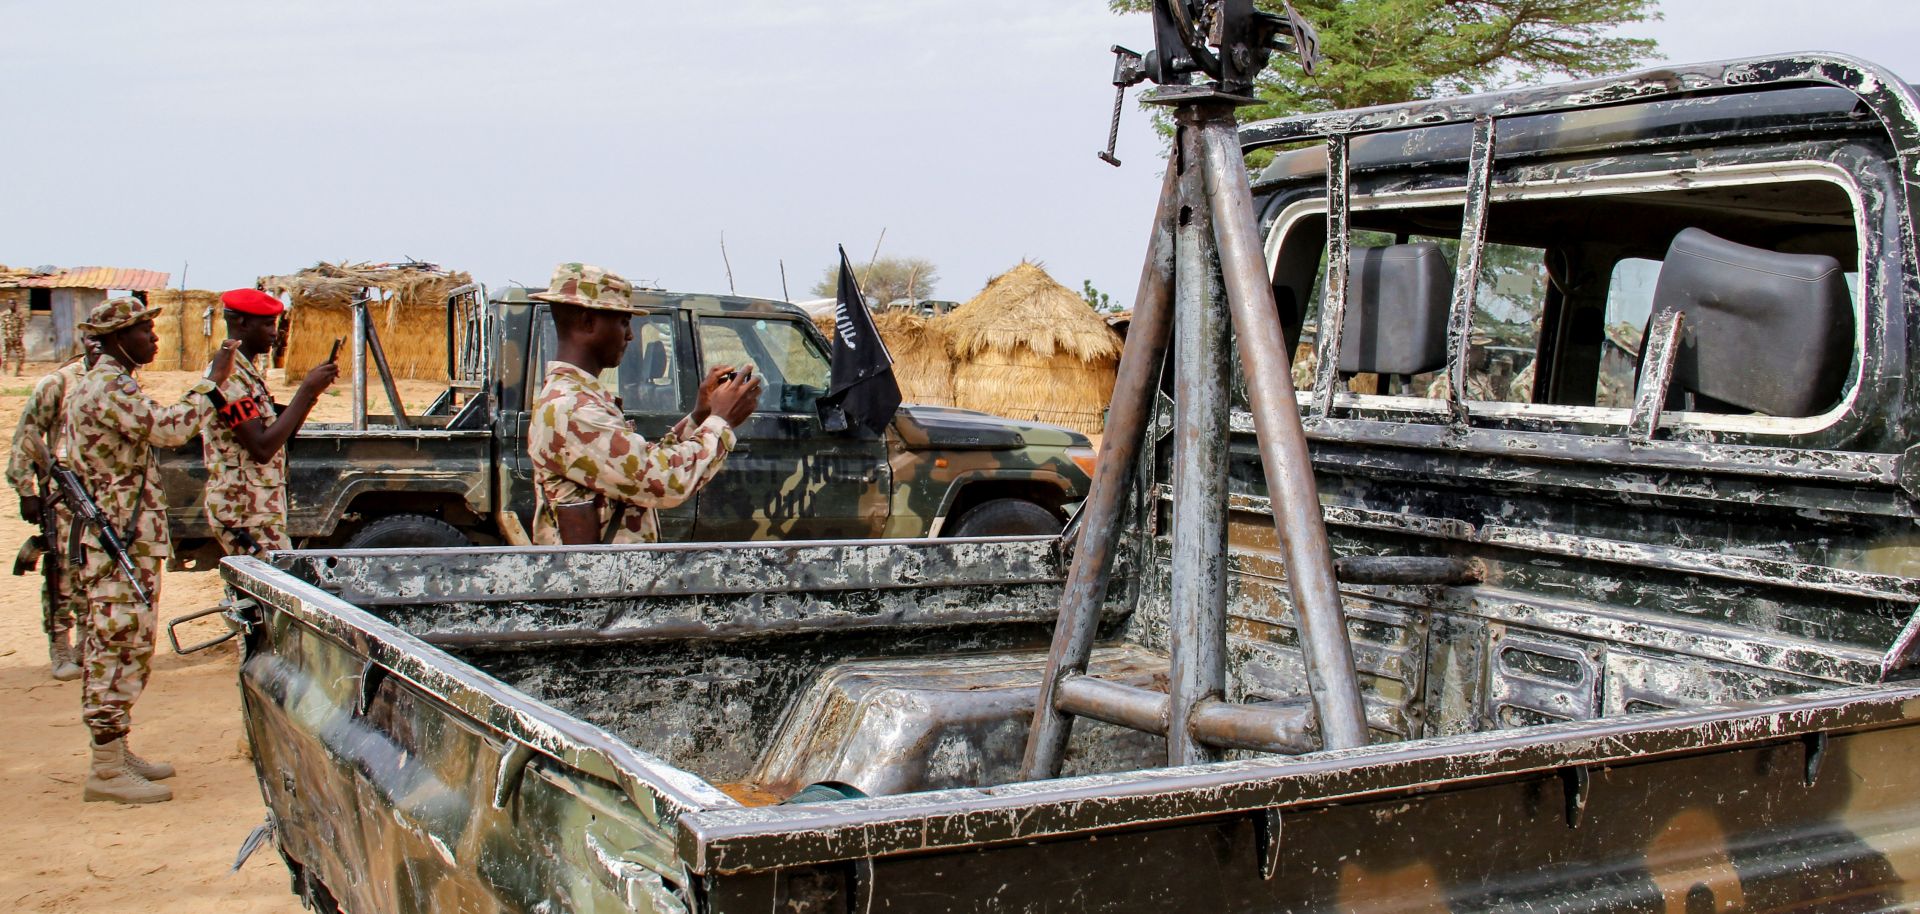 Soldiers take snapshots of vehicles allegedly belonging to ISWAP in Baga, Nigeria, on Aug. 2, 2019.